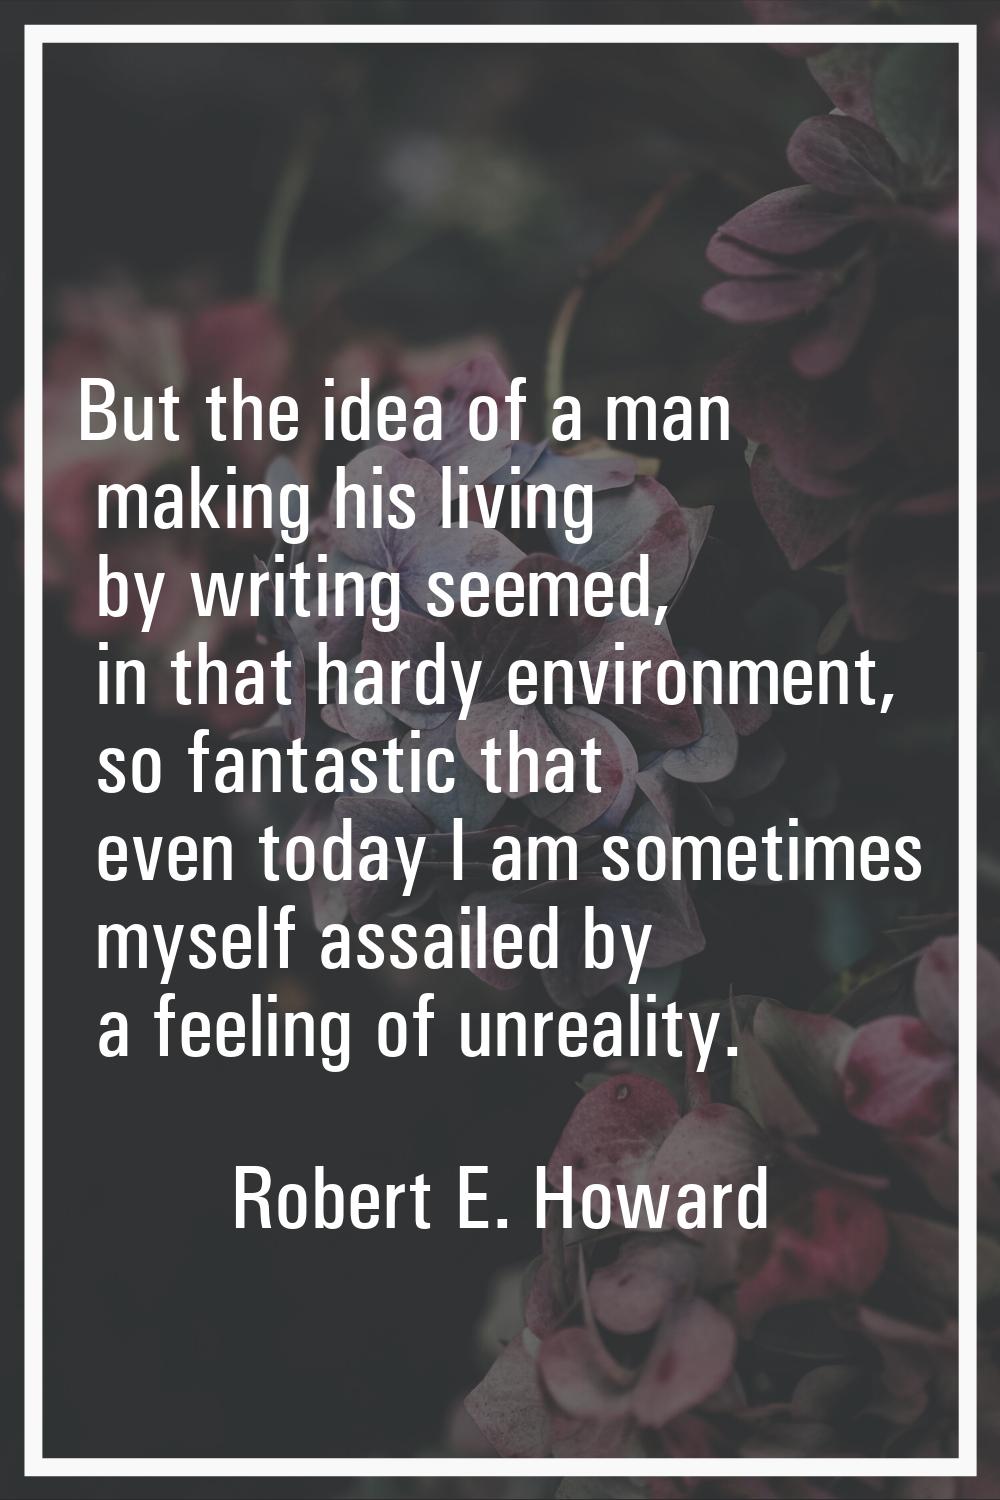 But the idea of a man making his living by writing seemed, in that hardy environment, so fantastic 